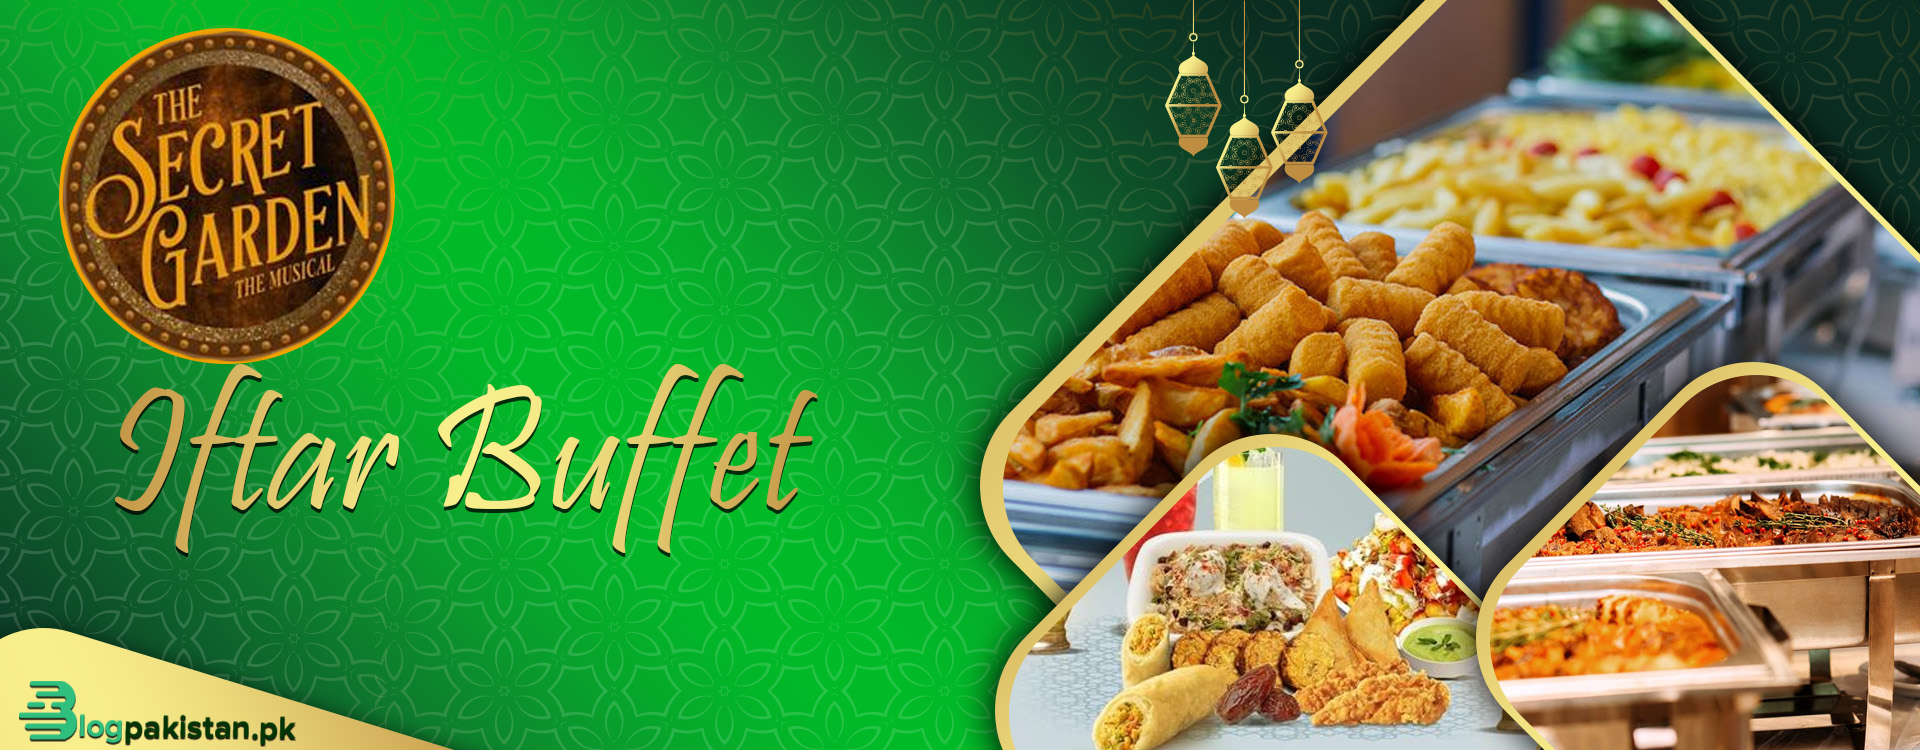 The Secret Garden Iftar Buffet - For Delicious Iftar on the Rooftop